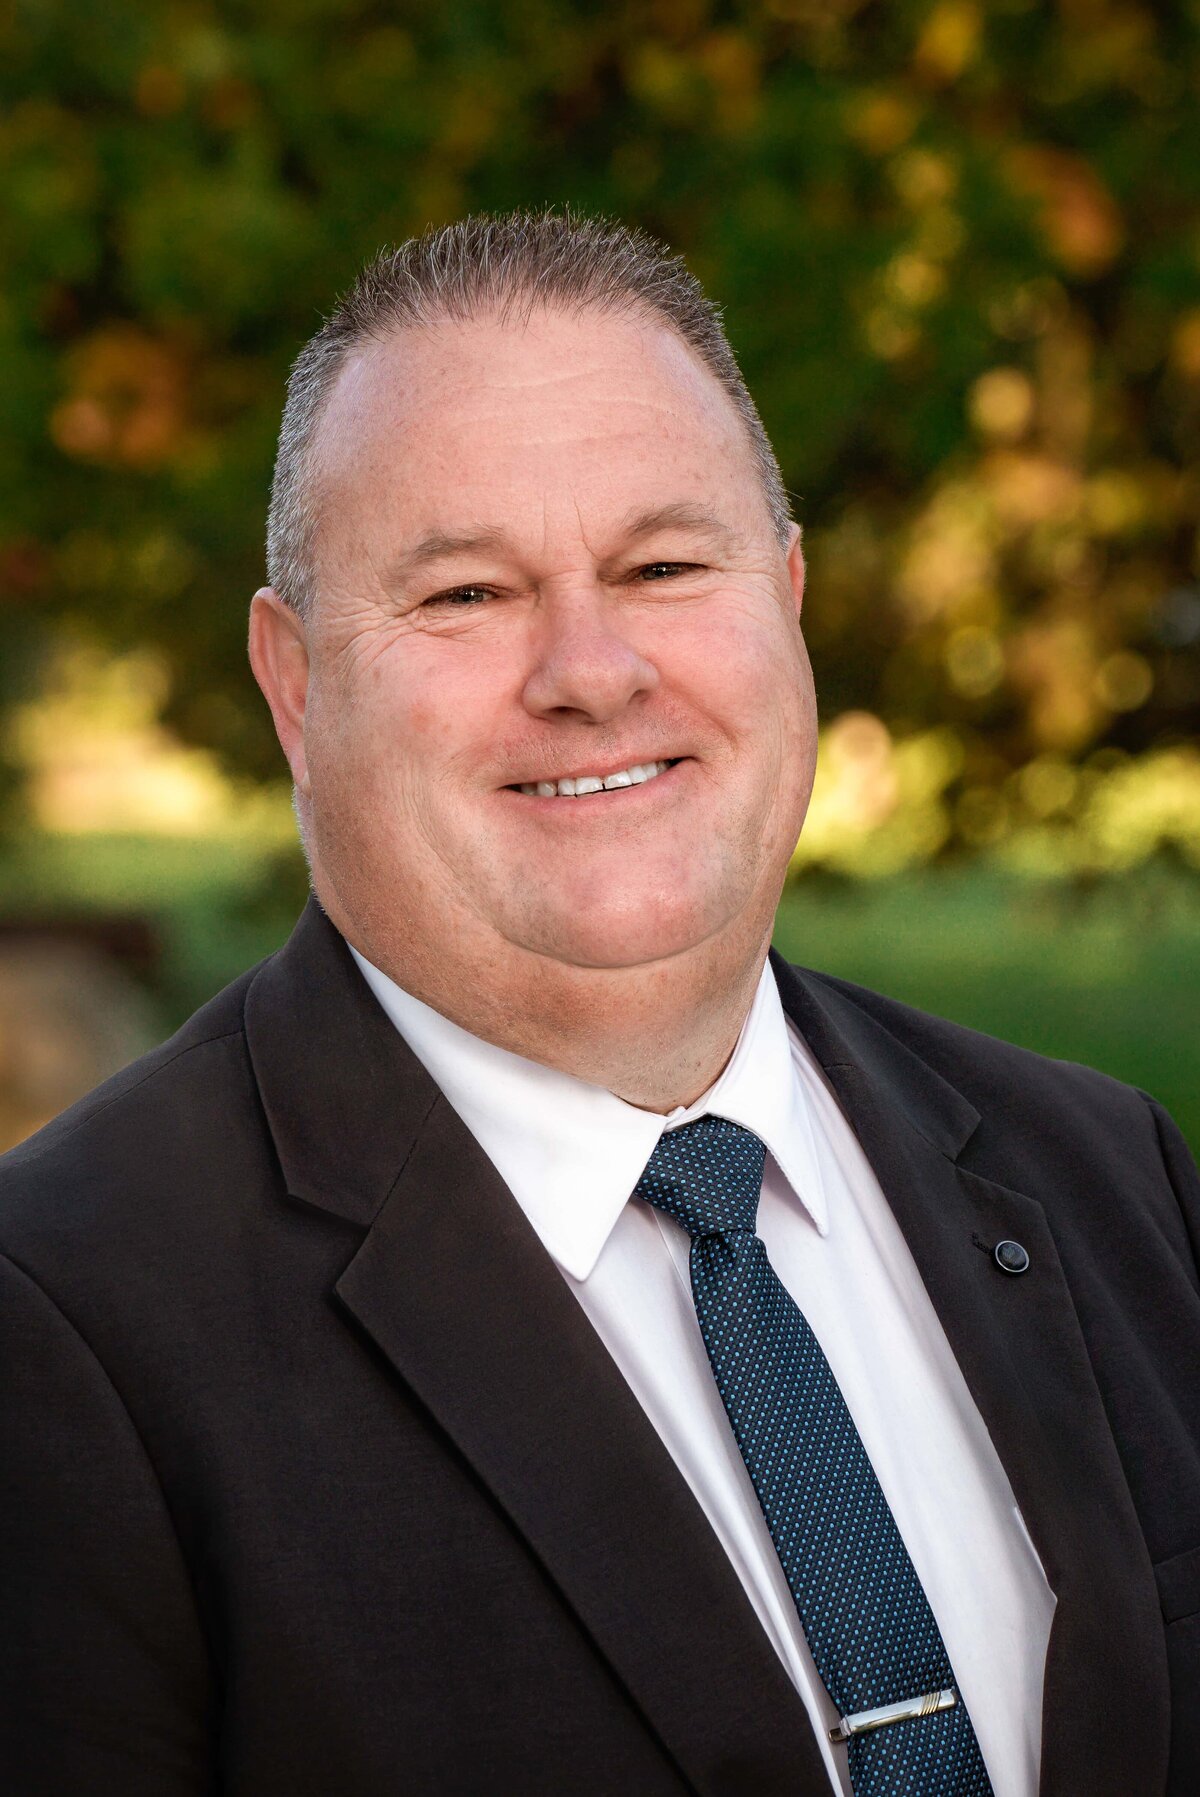 outdoor headshot of male real estate agent wearing white shirt, blue tie and black suit